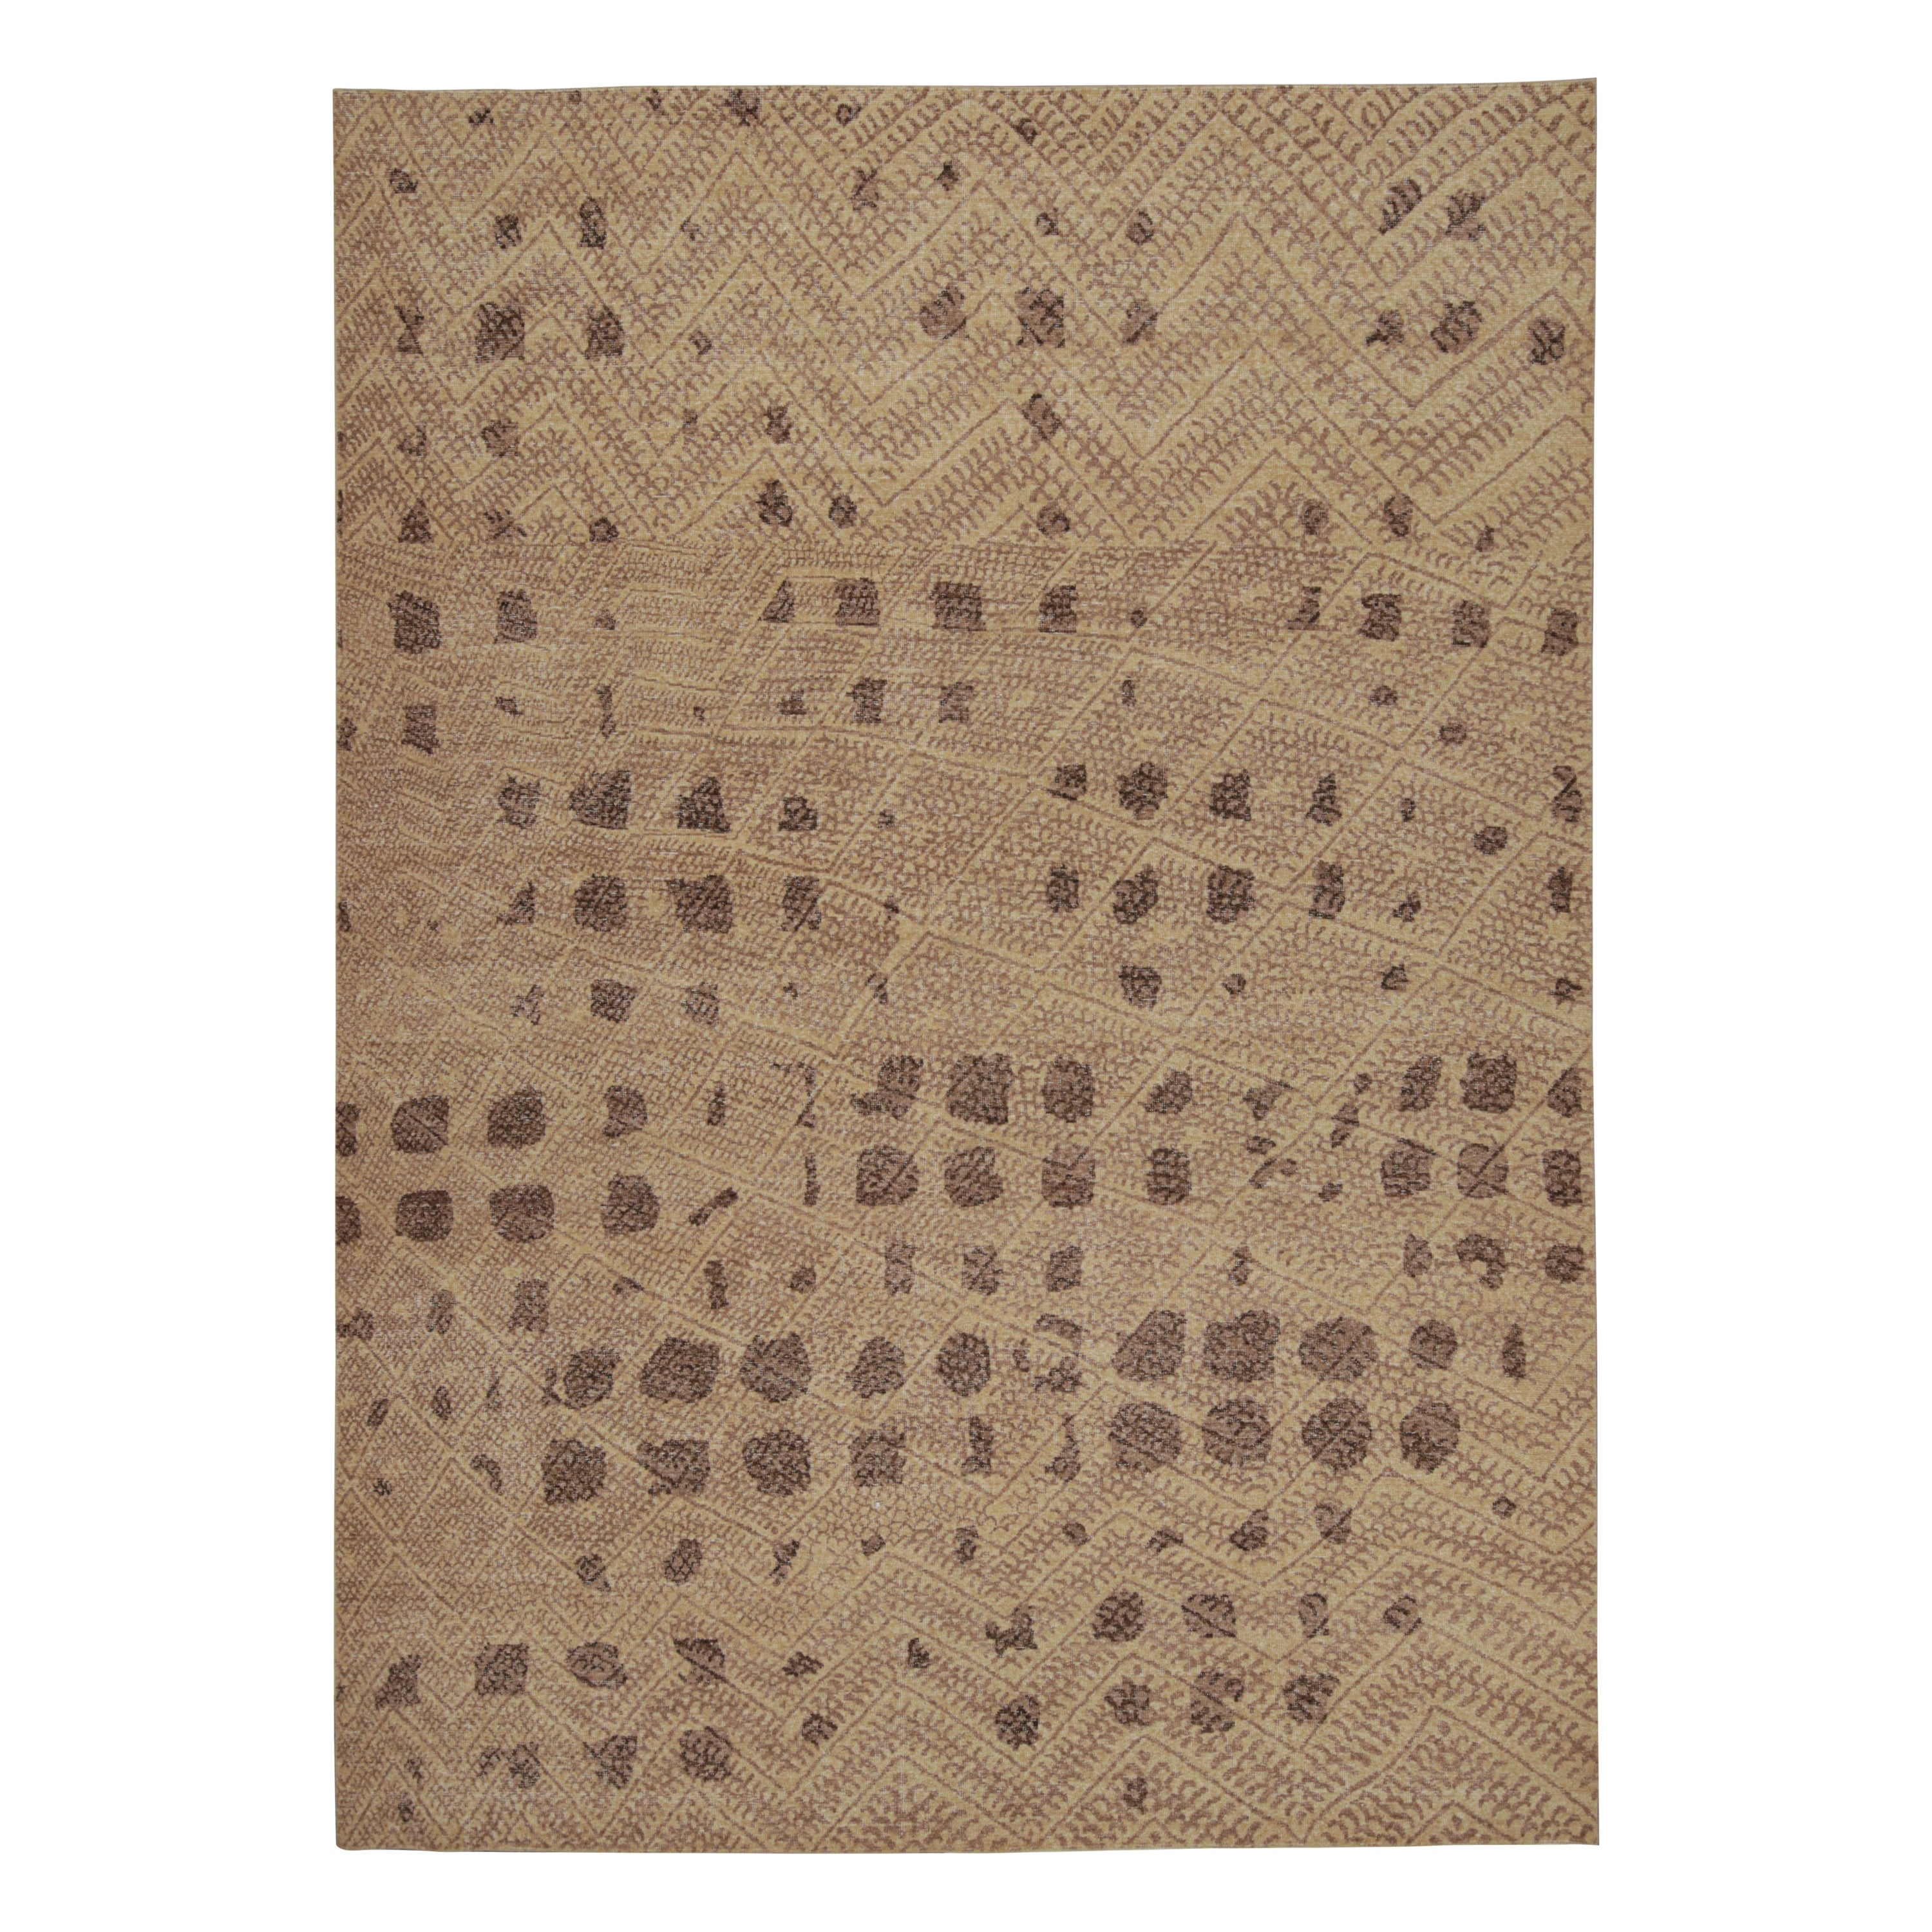 Rug & Kilim’s Oversized Moroccan Style Rug With Beige-Brown Geometric Patterns For Sale